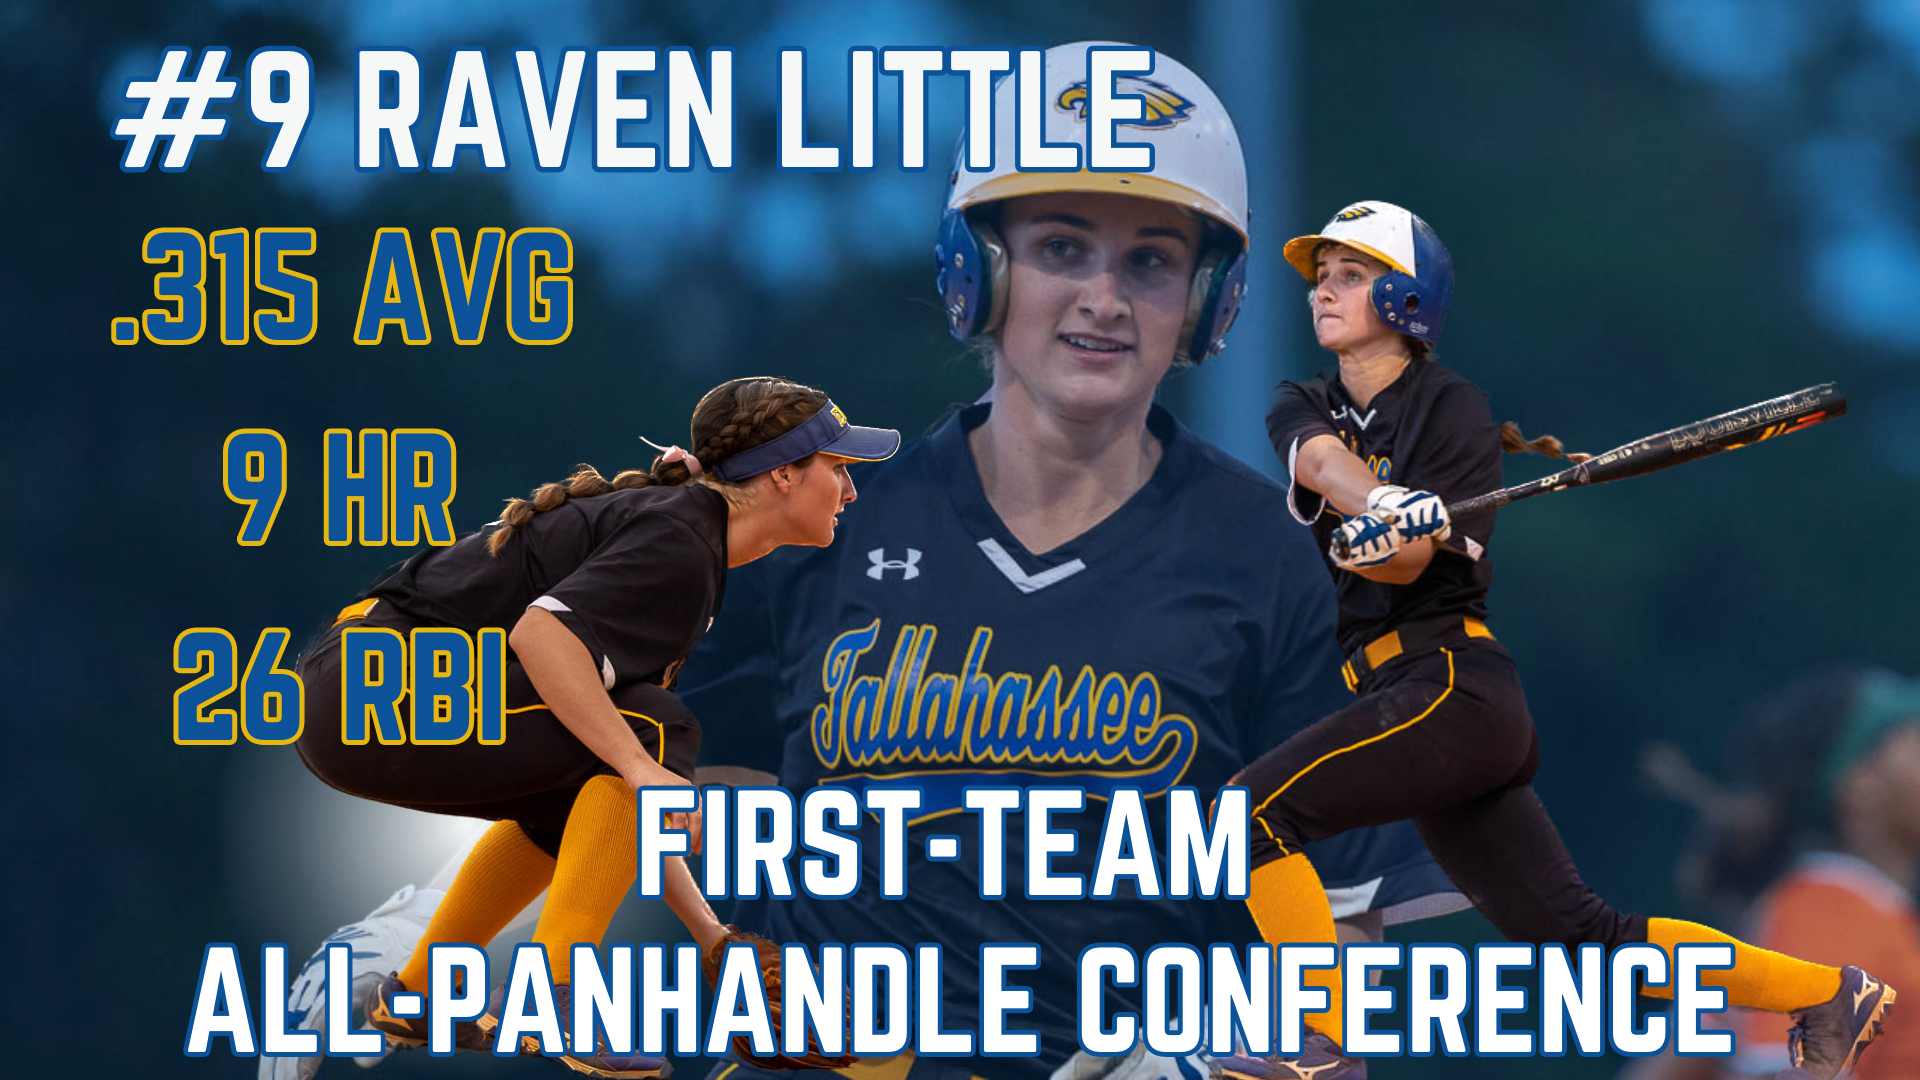 Seven TCC Softball players receive All-Panhandle Conference Honors